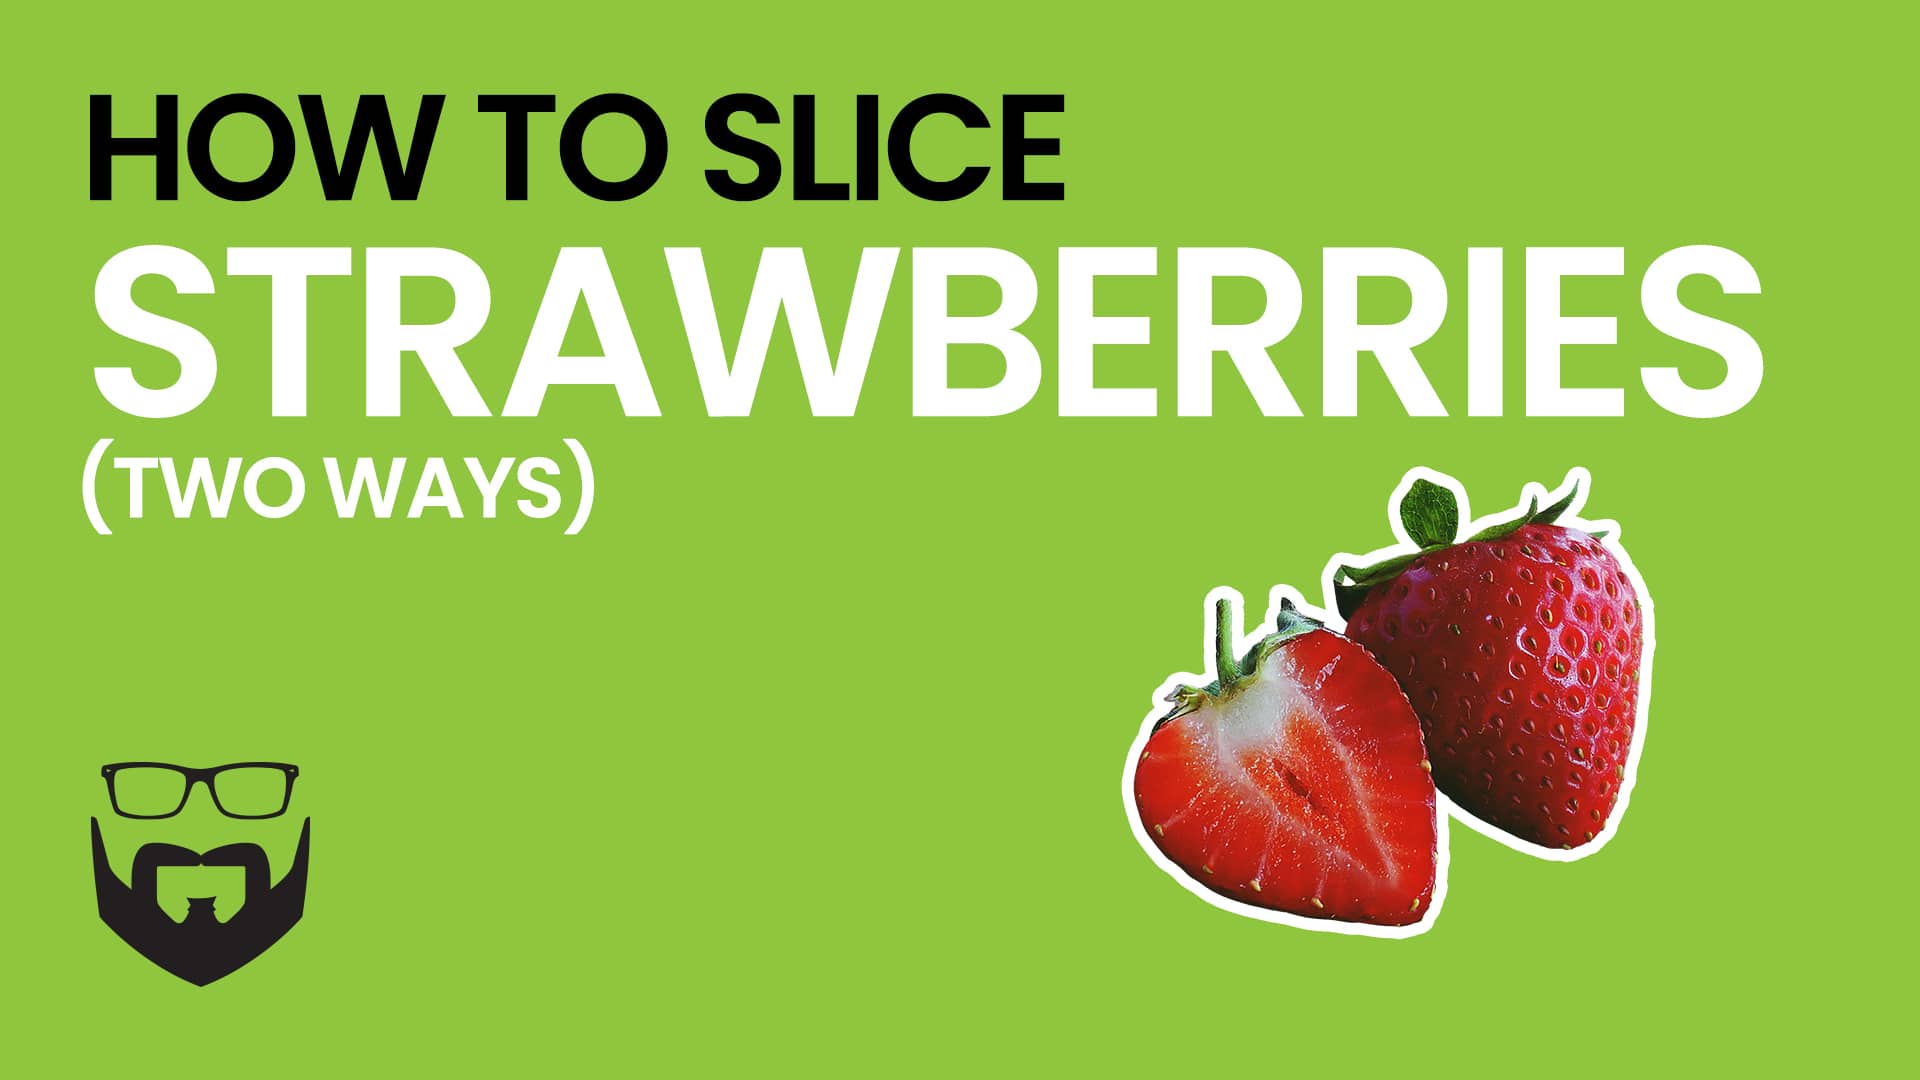 How to Slice Strawberries Fast Video - Green